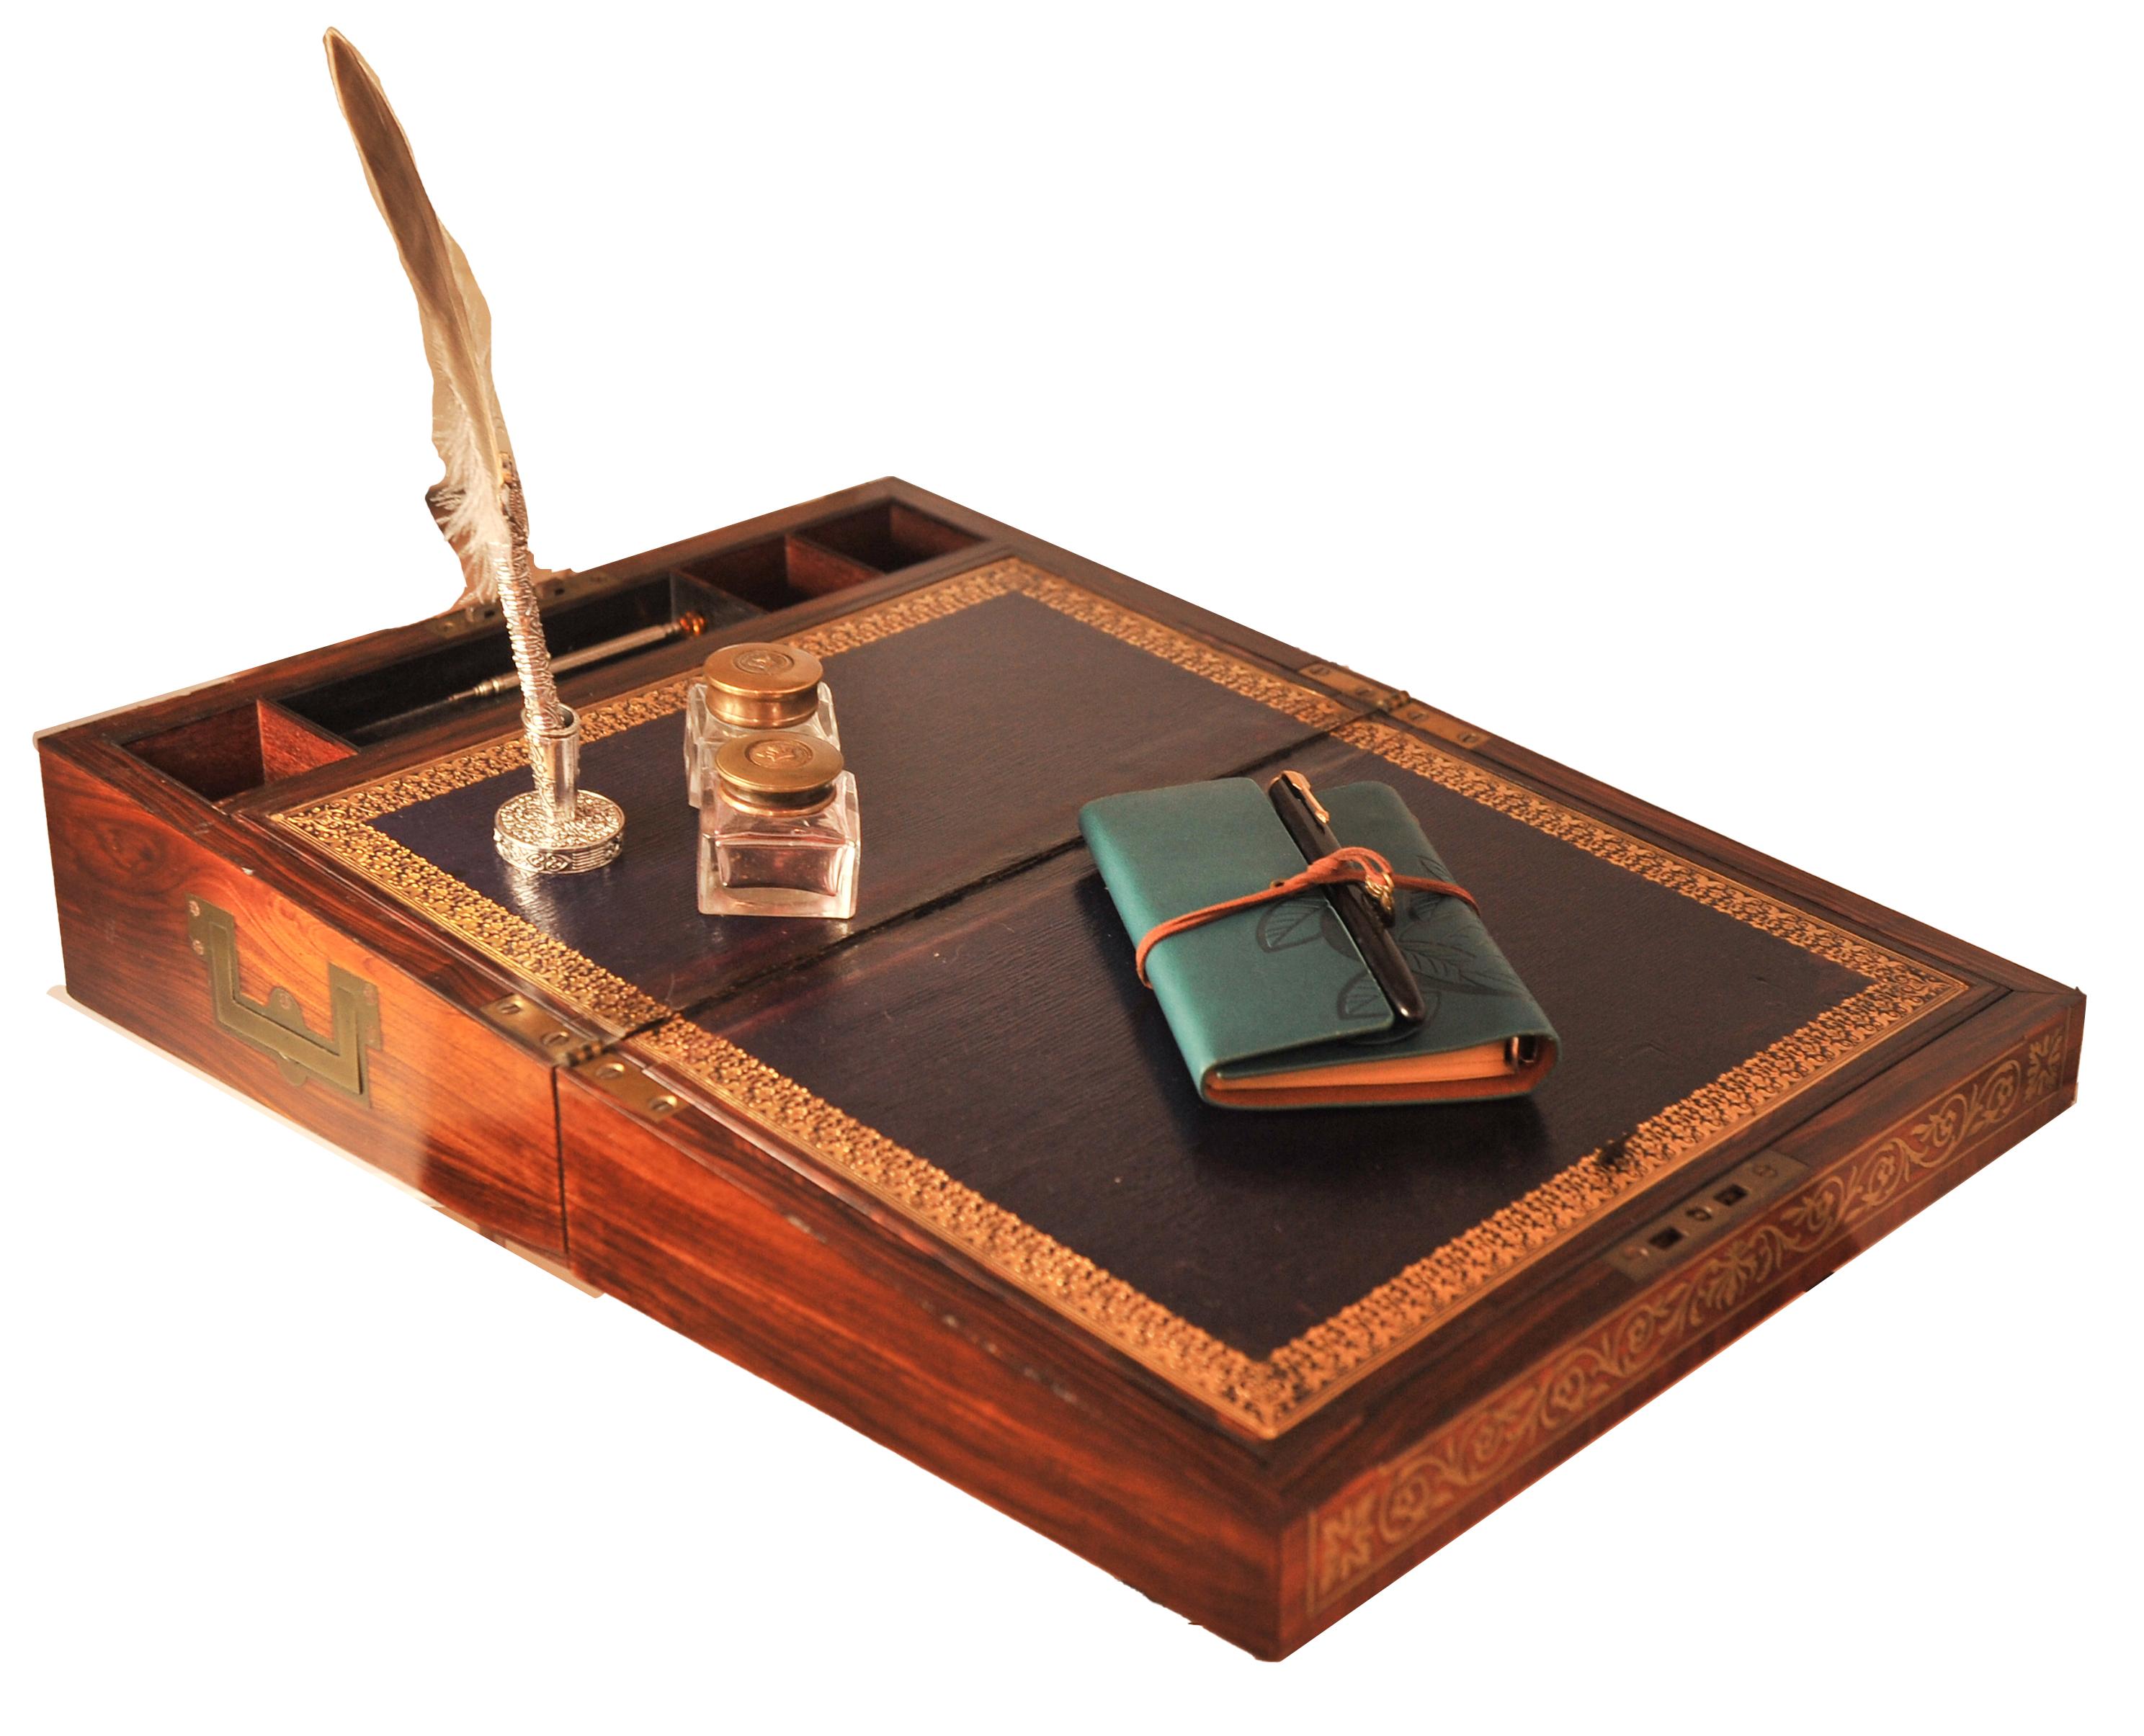 Handcrafted 19th Century Rosewood Veneer Writing Slope With A Tooled Purple Leather Writing Liner. Item Featured Brass Carry Handles & Is Finished With A Decorative Brass Inlay. Manufactured By Esteemed Maker Wells & Lambe.

Item will include new